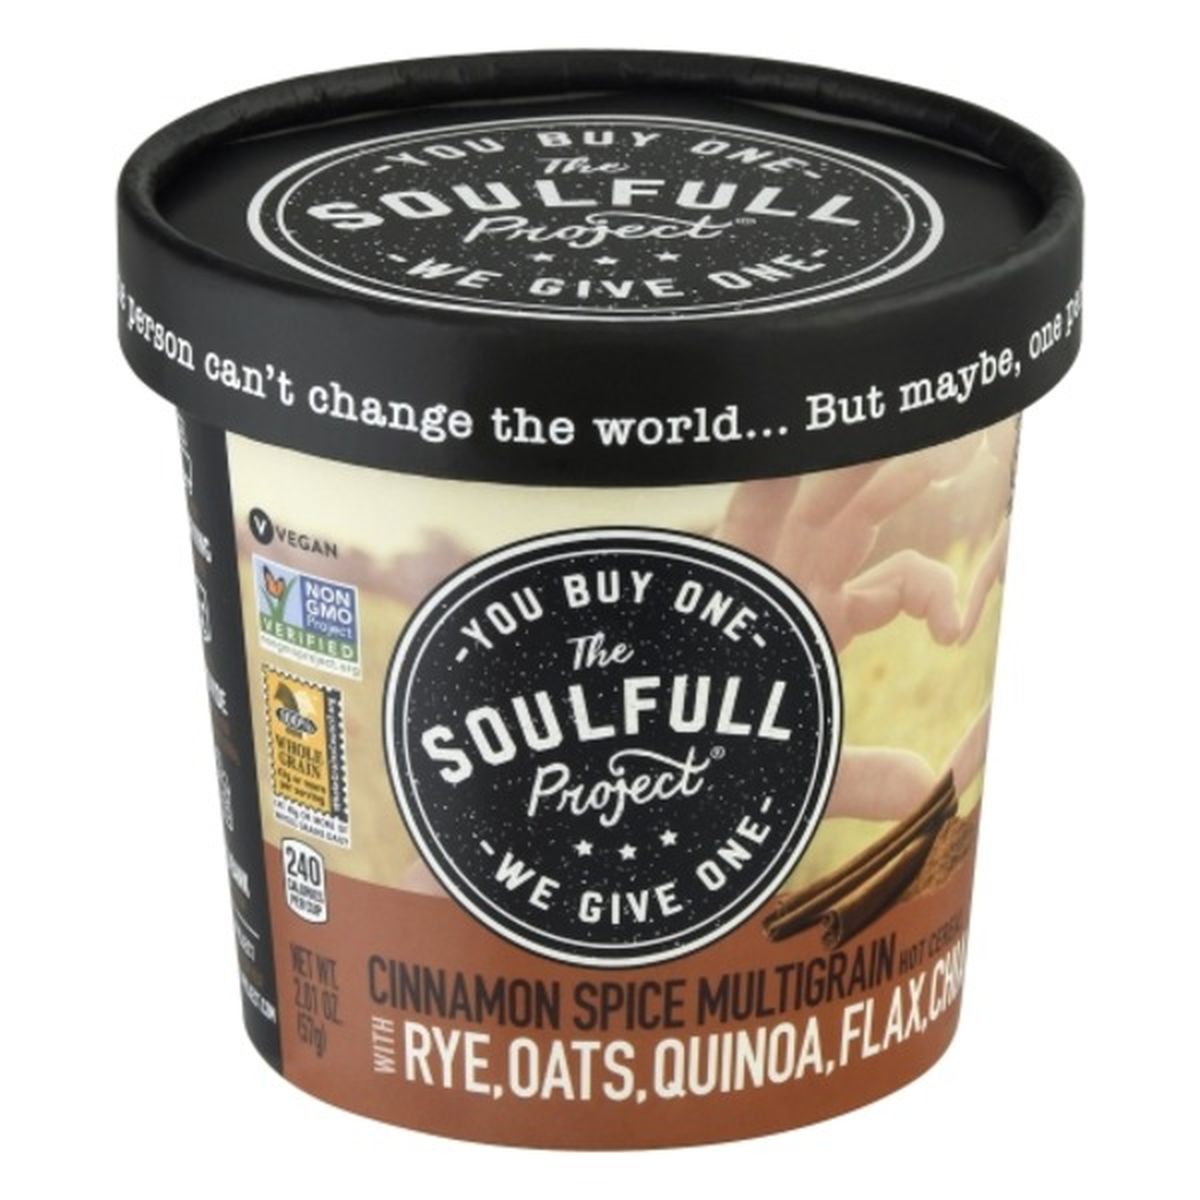 Calories in The Soulfull Project Hot Cereal, Cinnamon Spice, Multigrain